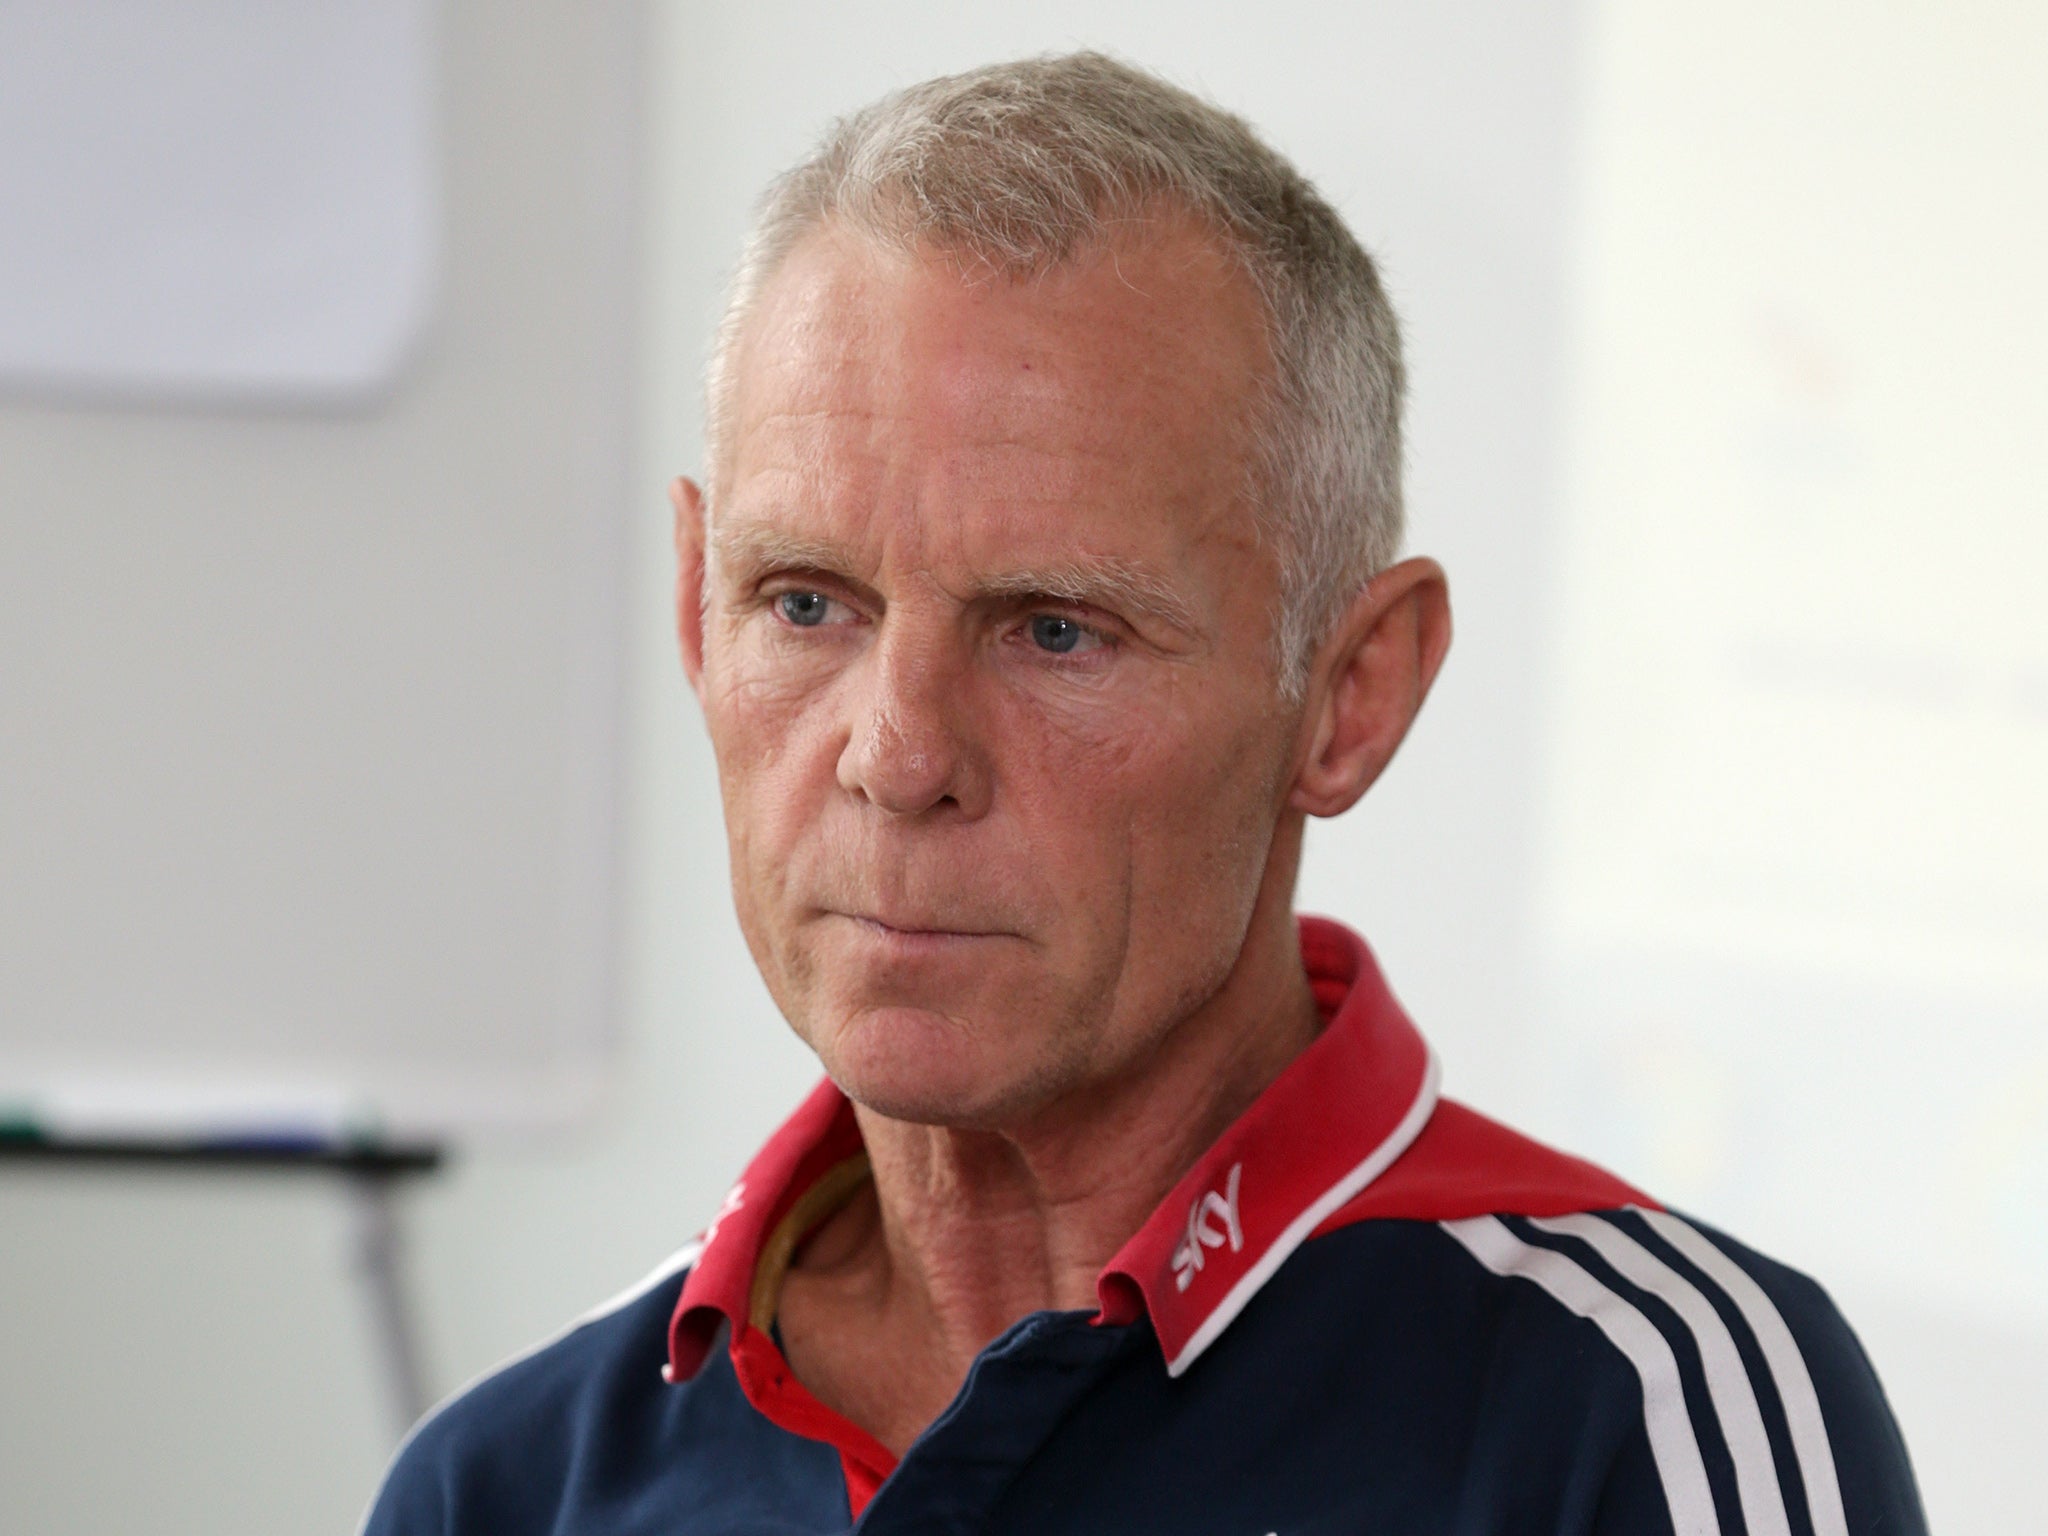 &#13;
Sutton resigned from British Cycling while the investigation was carried out &#13;